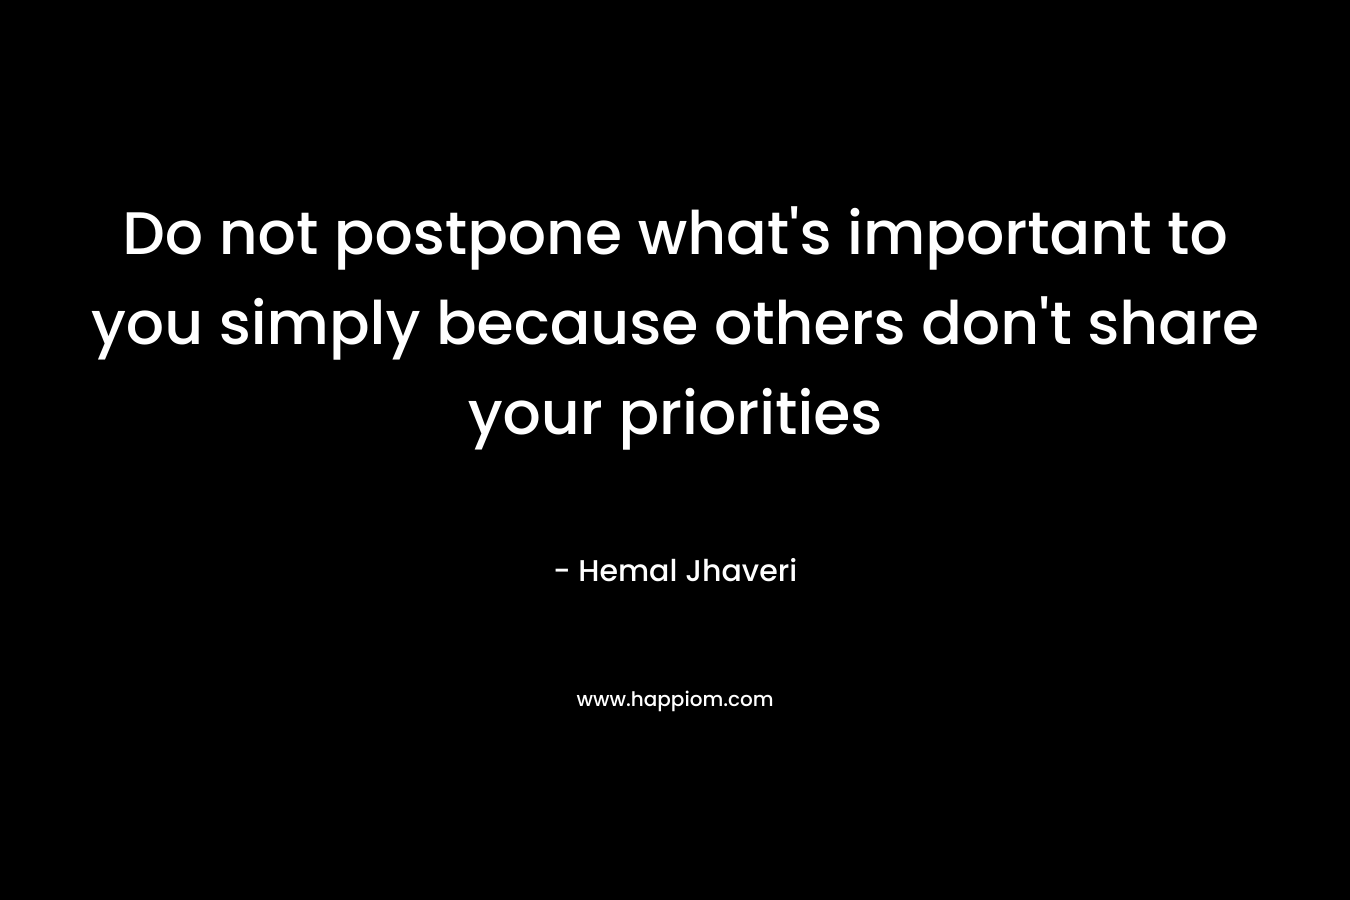 Do not postpone what’s important to you simply because others don’t share your priorities – Hemal Jhaveri